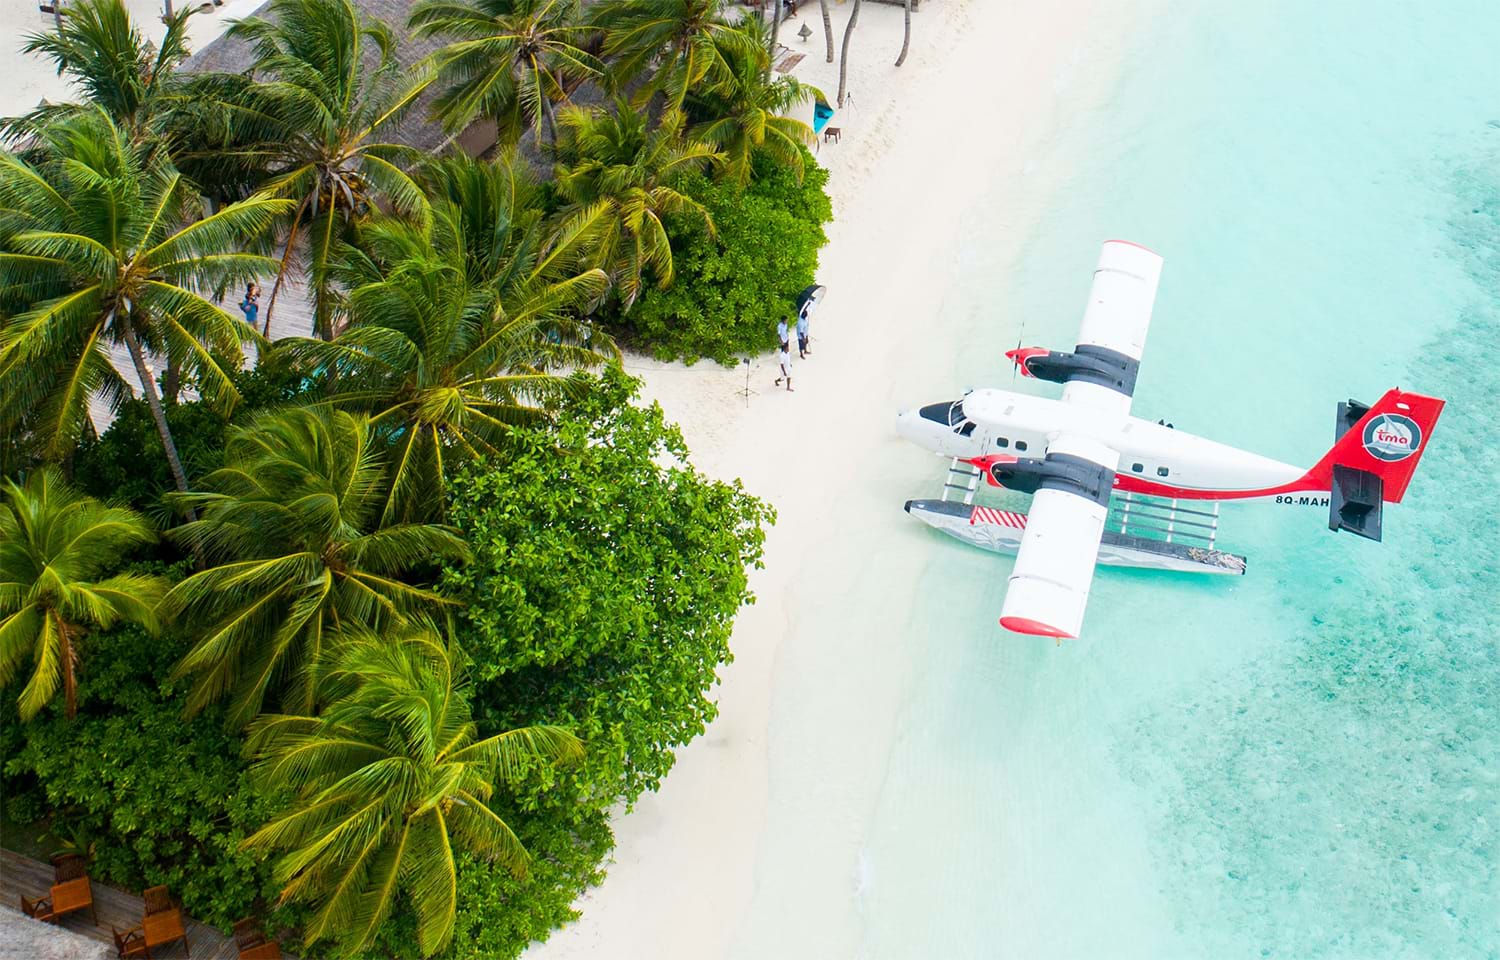 Seaplane landed at tropical beach